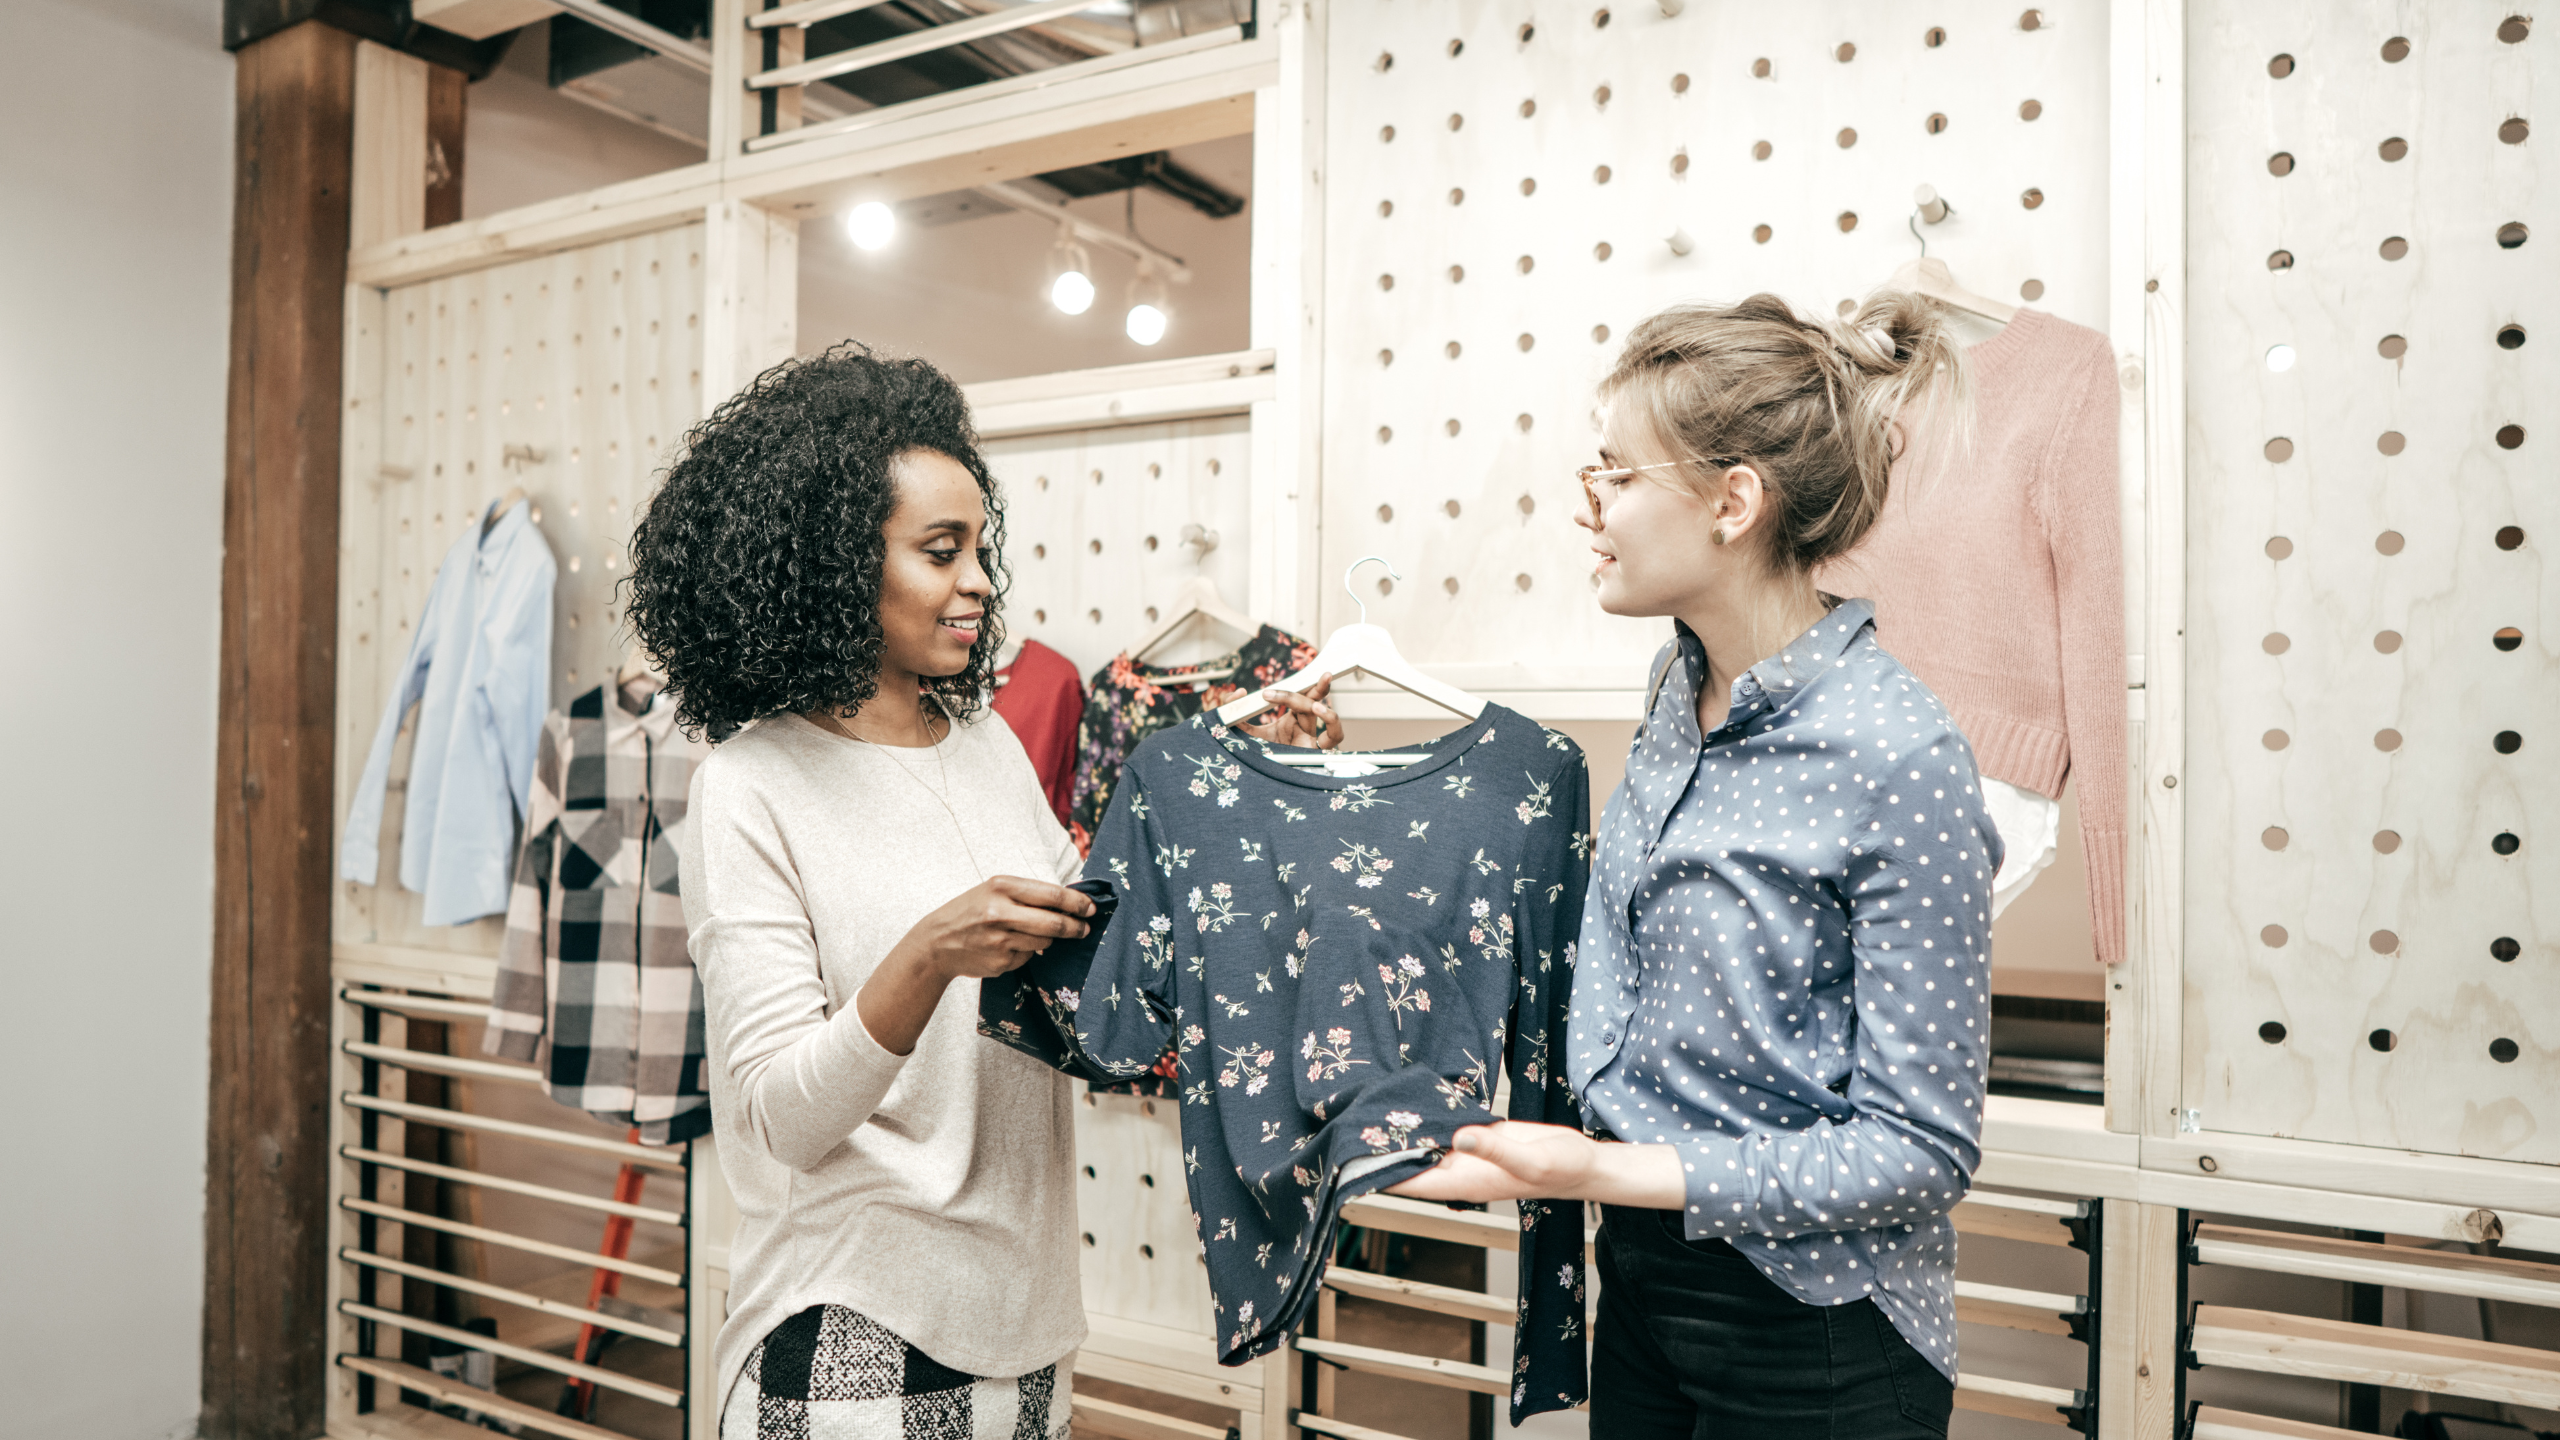 How retailers can make front-line employment attractive and retain valuable staff members